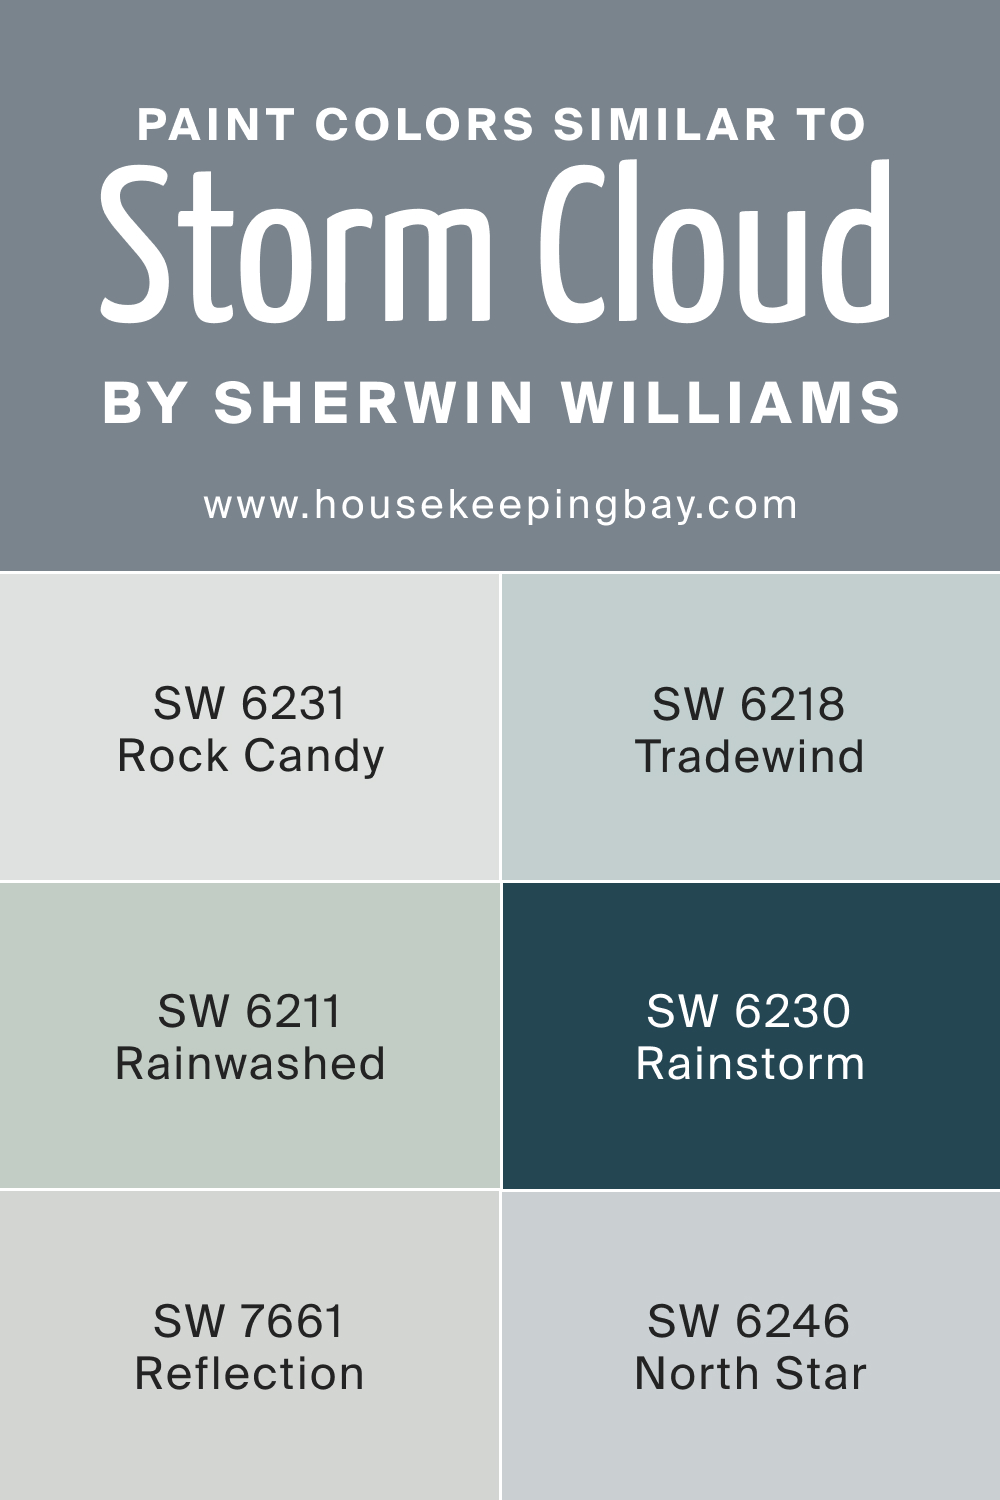 Paint Color Similar to SW 6249 Storm Cloud by Sherwin Williams